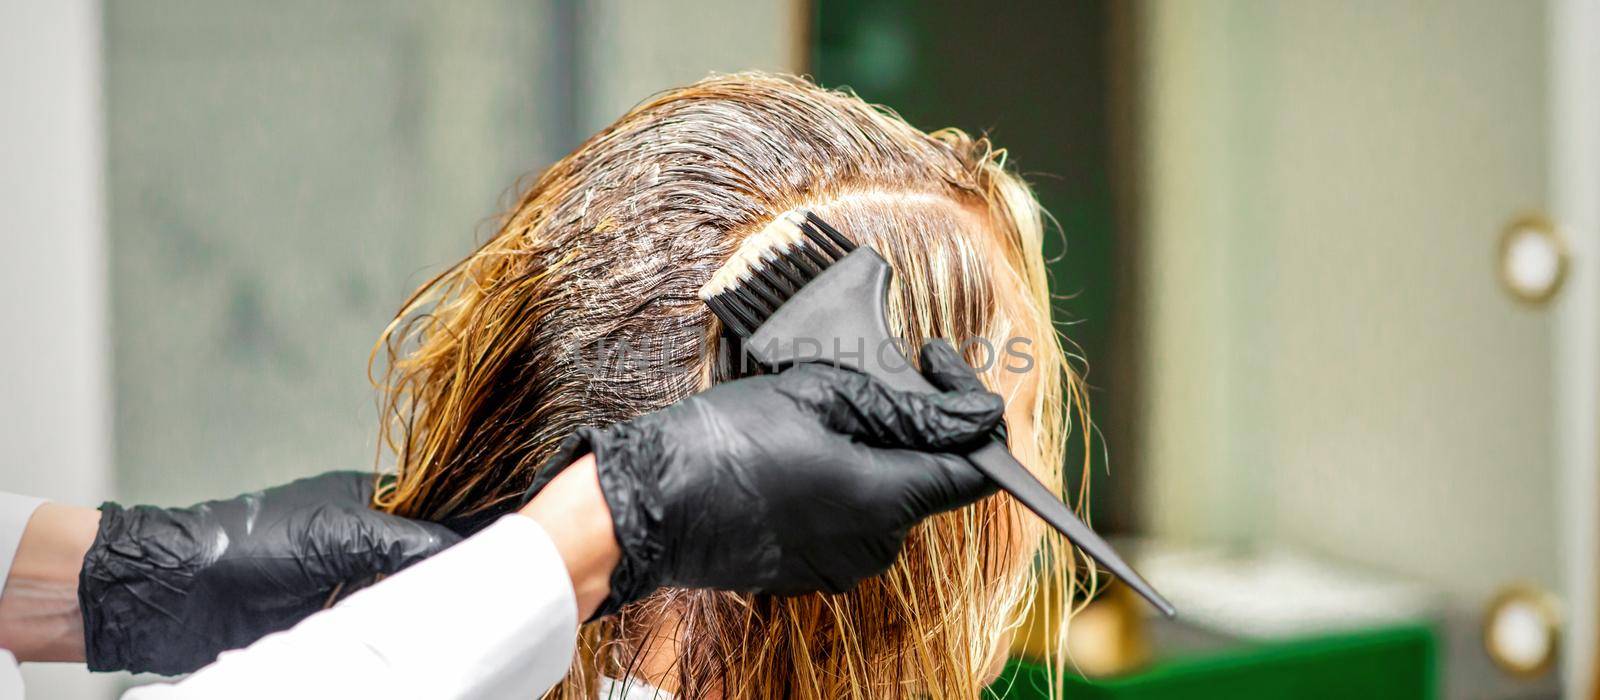 Hand of a hairdresser in black gloves applying dye to the female hair in a beauty salon